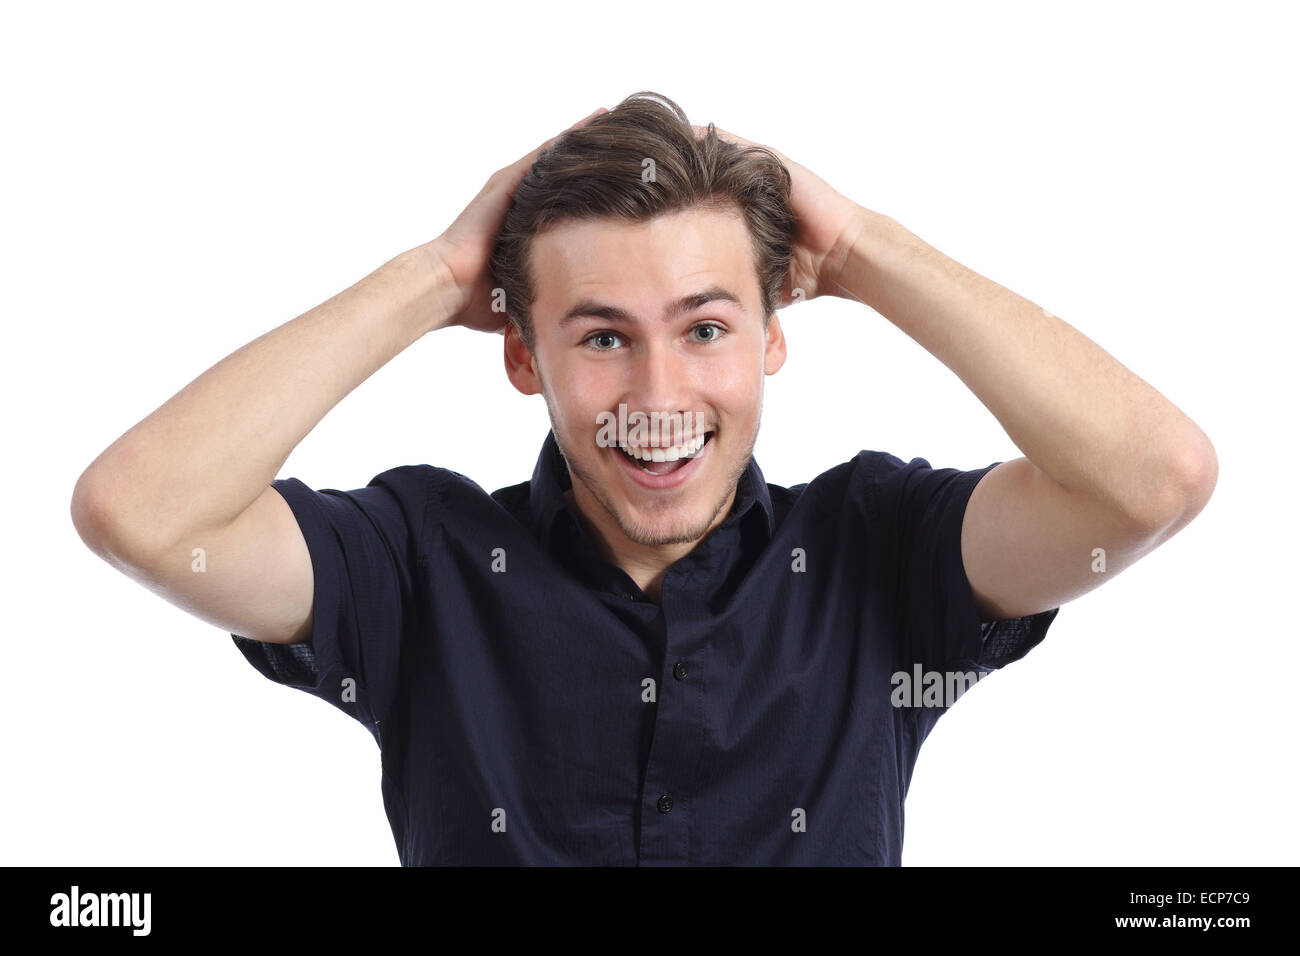 Surprised happy man smiling with hands on head isolated on a white background Stock Photo